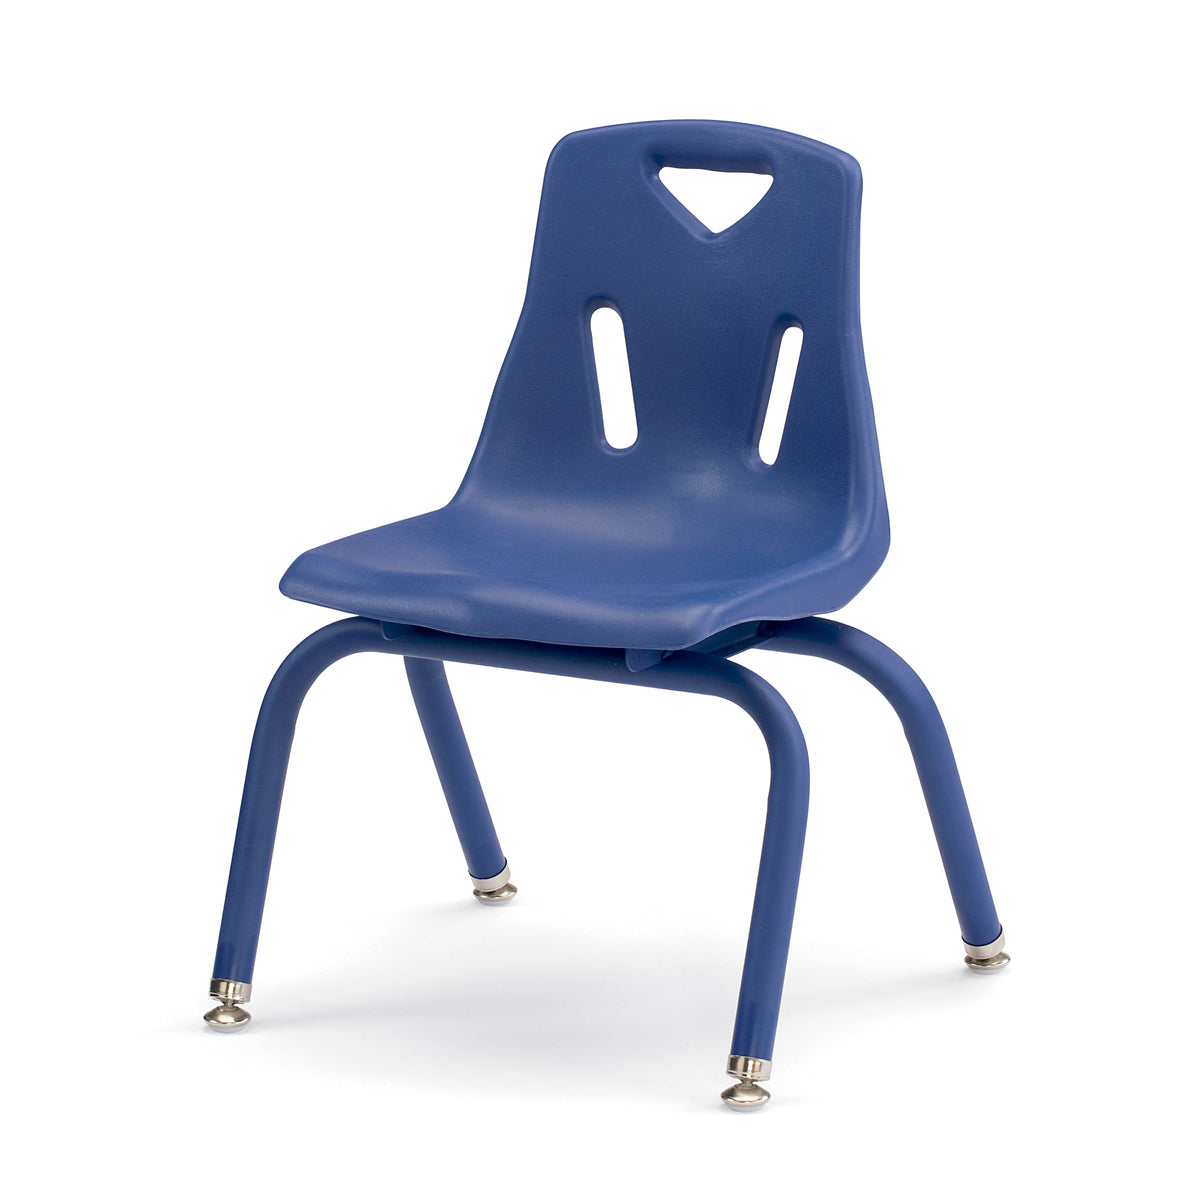 8122JC6003, Berries Stacking Chairs with Powder-Coated Legs - 12" Ht - Set of 6 - Blue